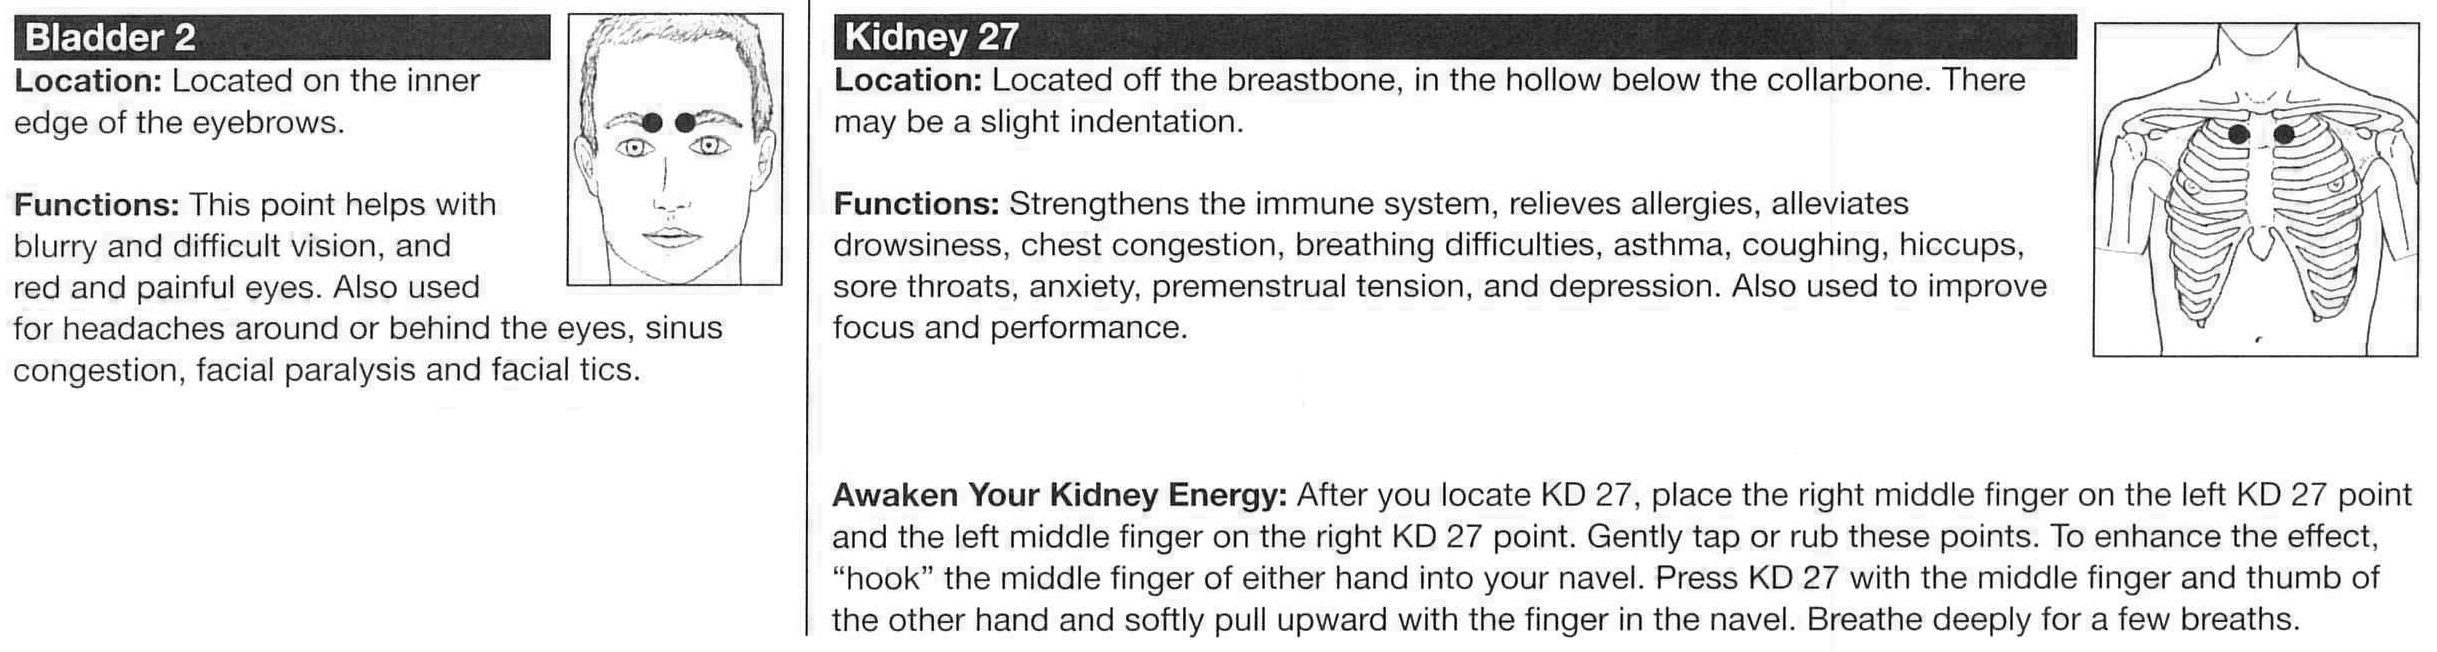 Acupuncture points: bladder 2 and kidney 27